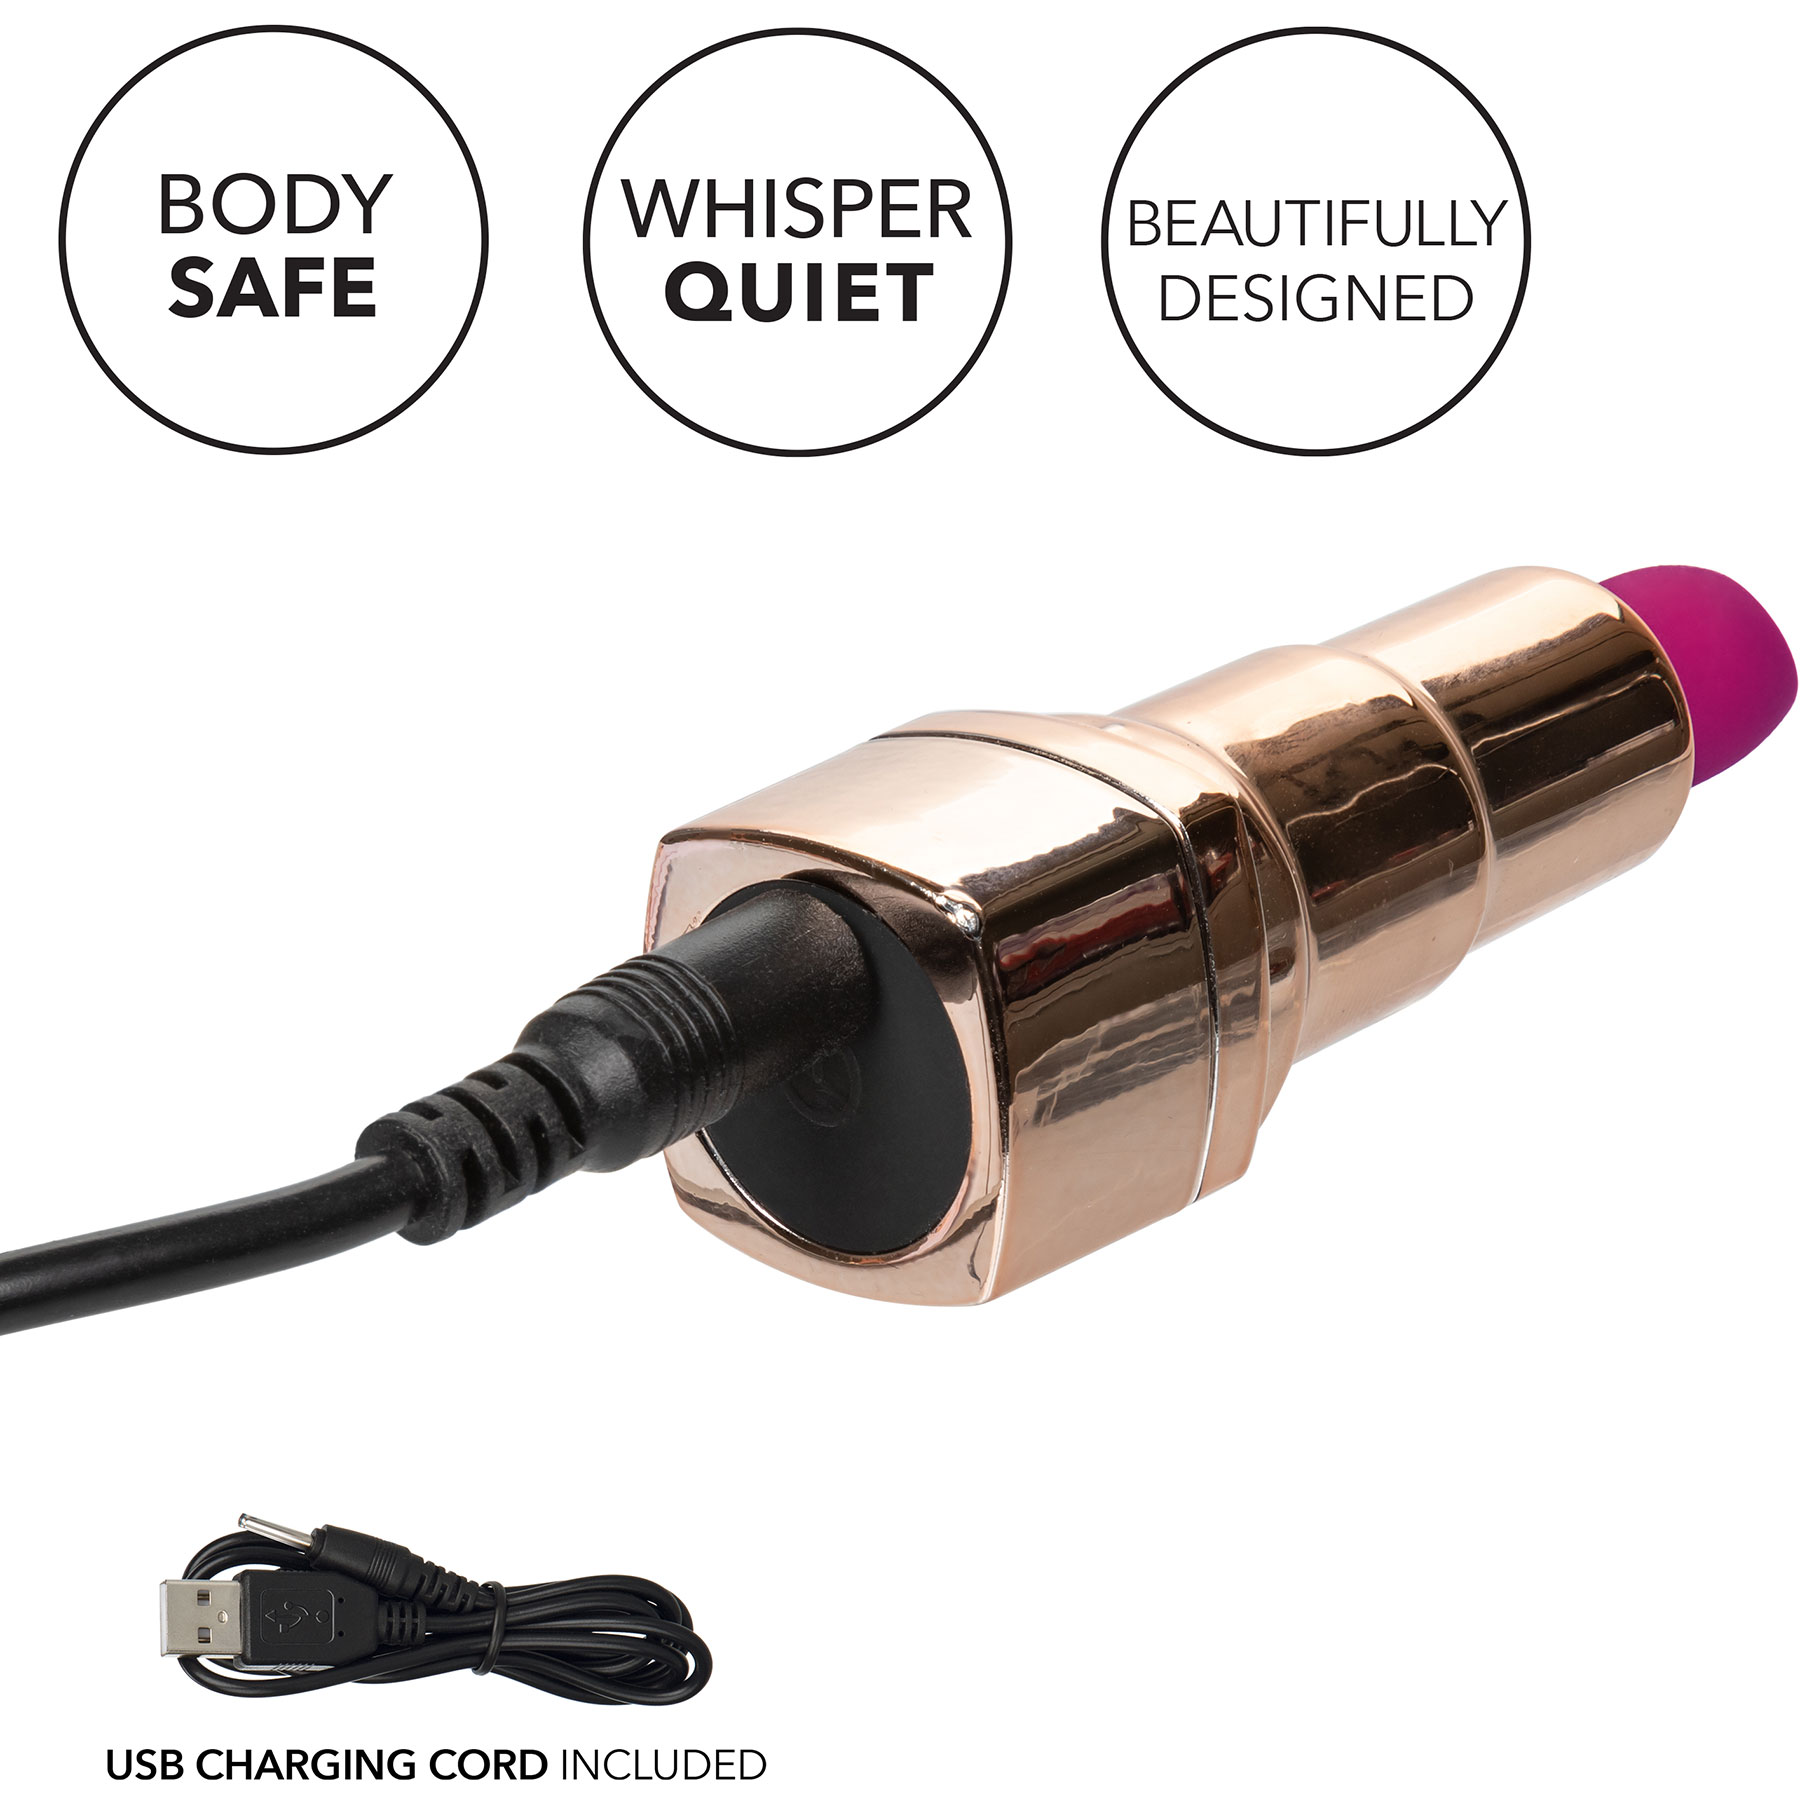 Hide & Play Rechargeable Lipstick Vibrator - Features